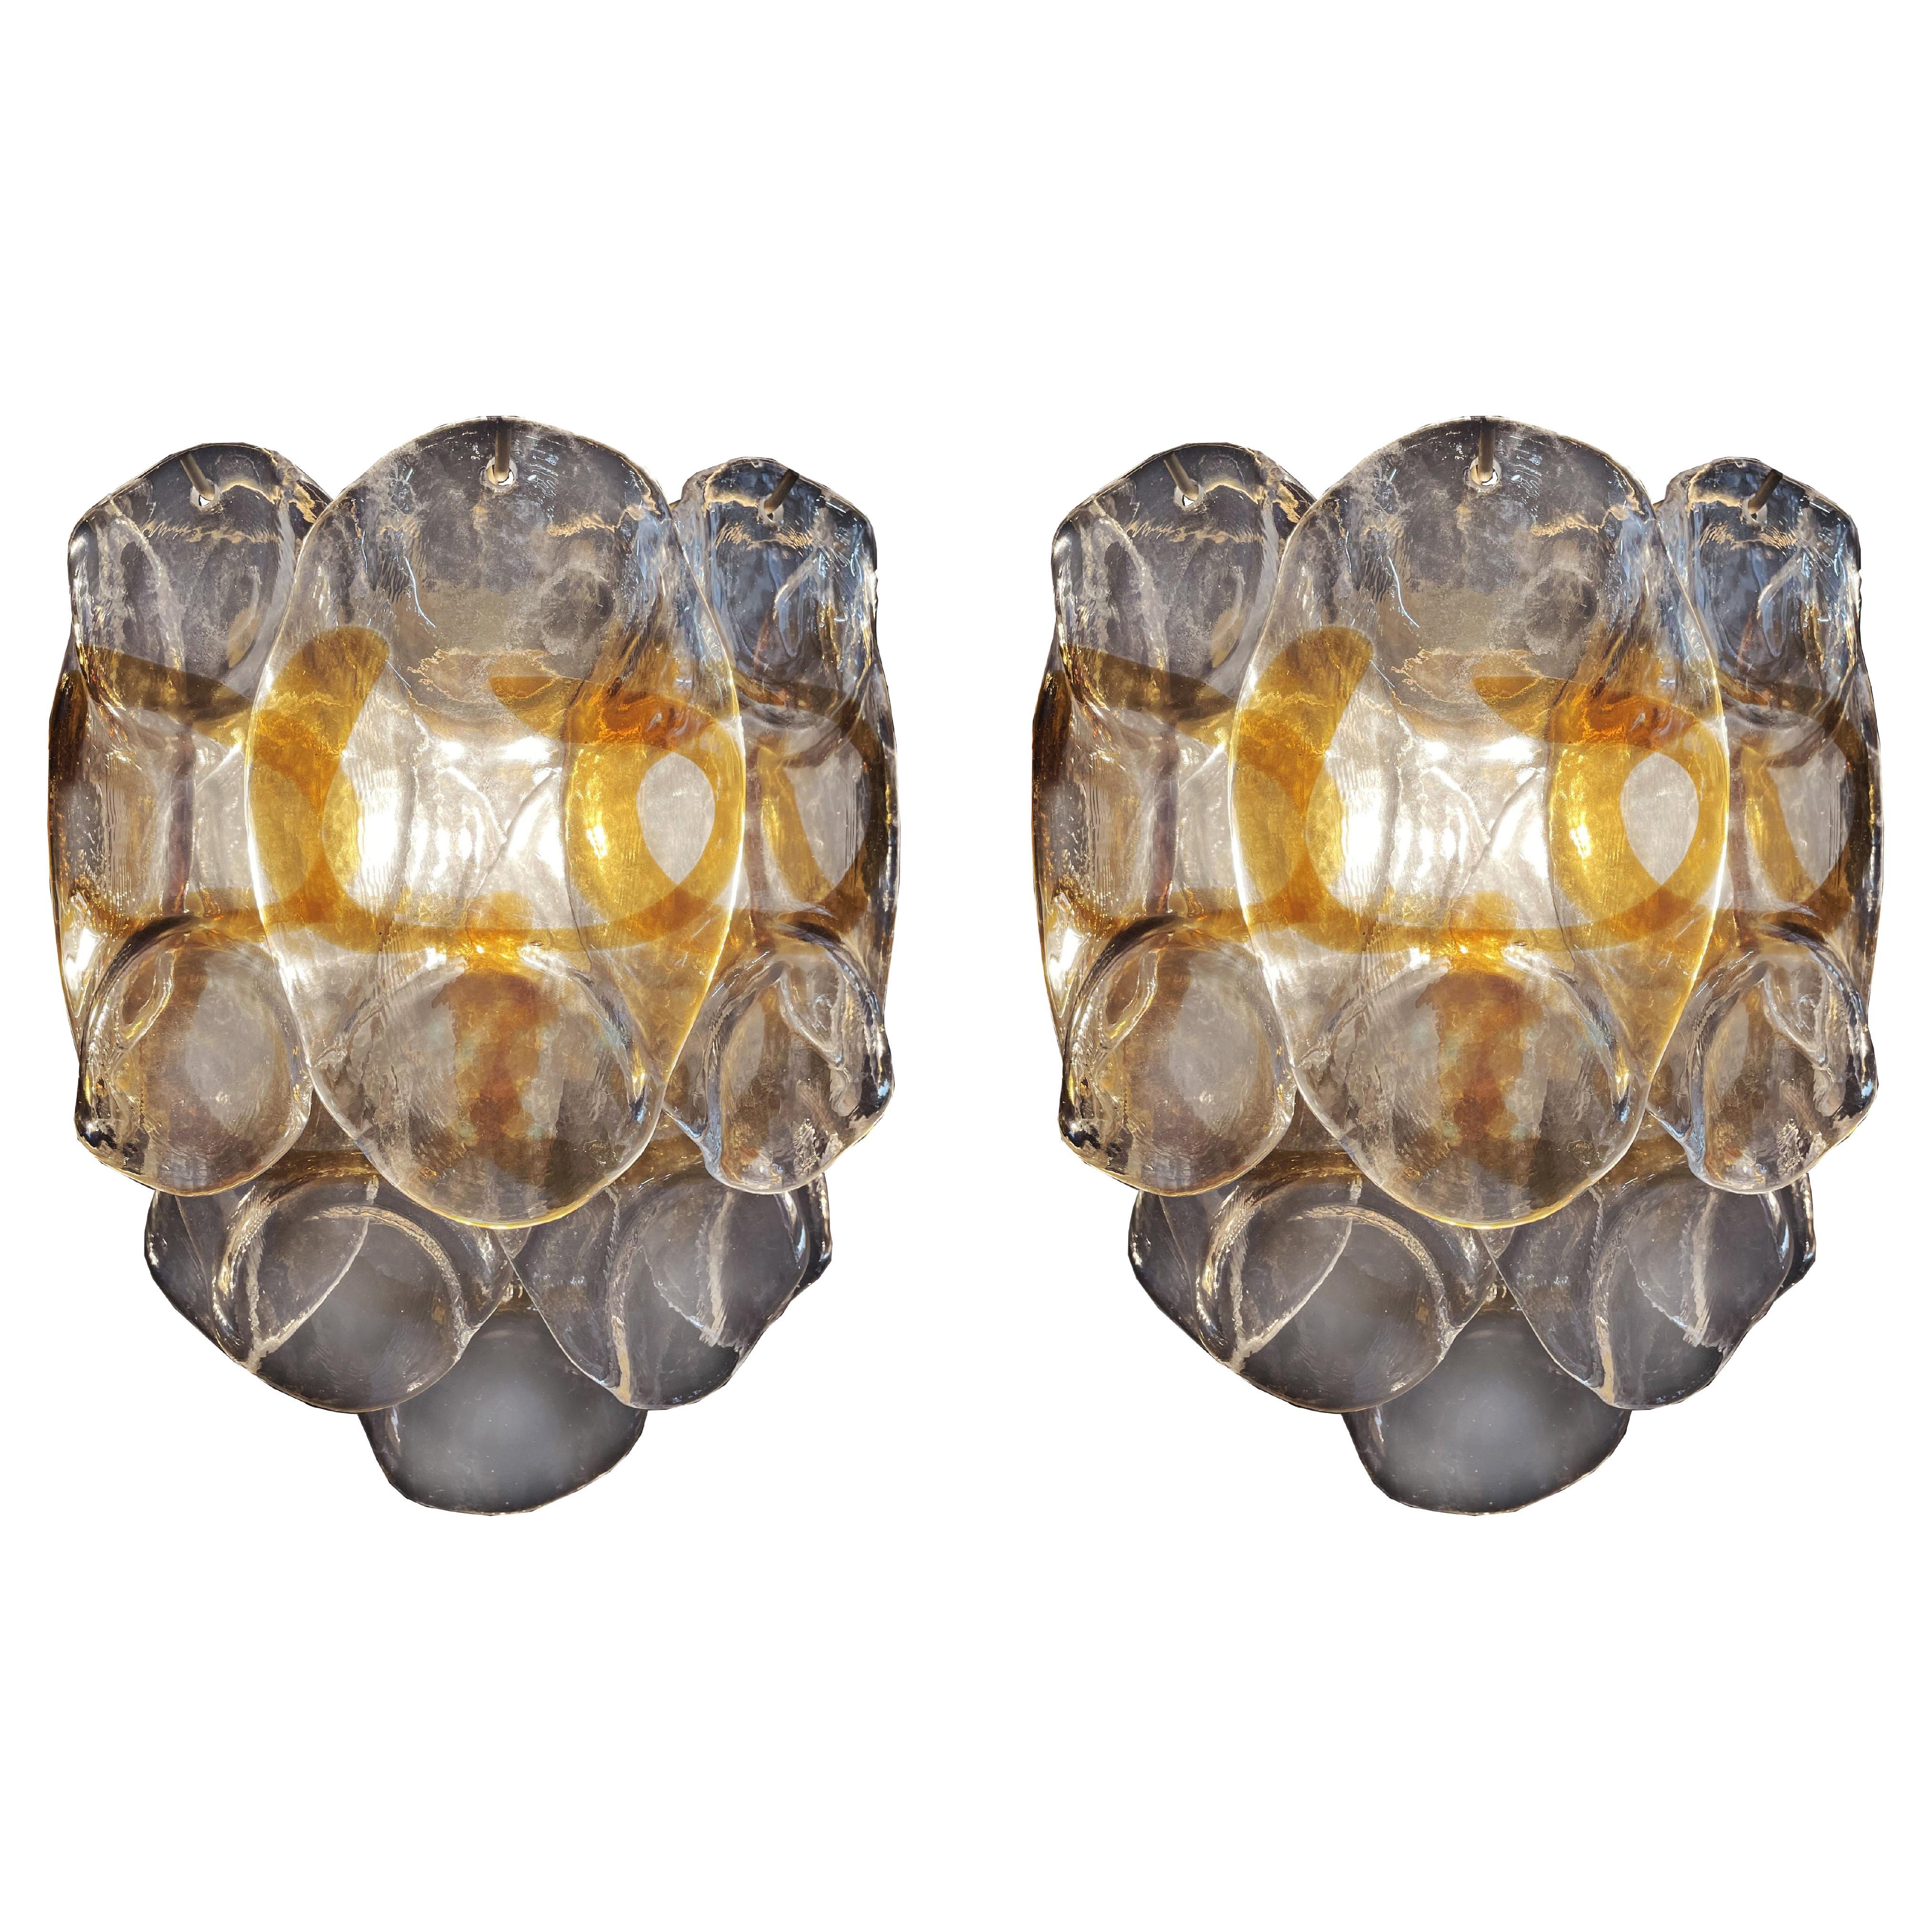 Pair of vintage Italian Murano sconcesin Vistosi style. Wall lights have 10 fantastic Murano amber and trasparent glasses (